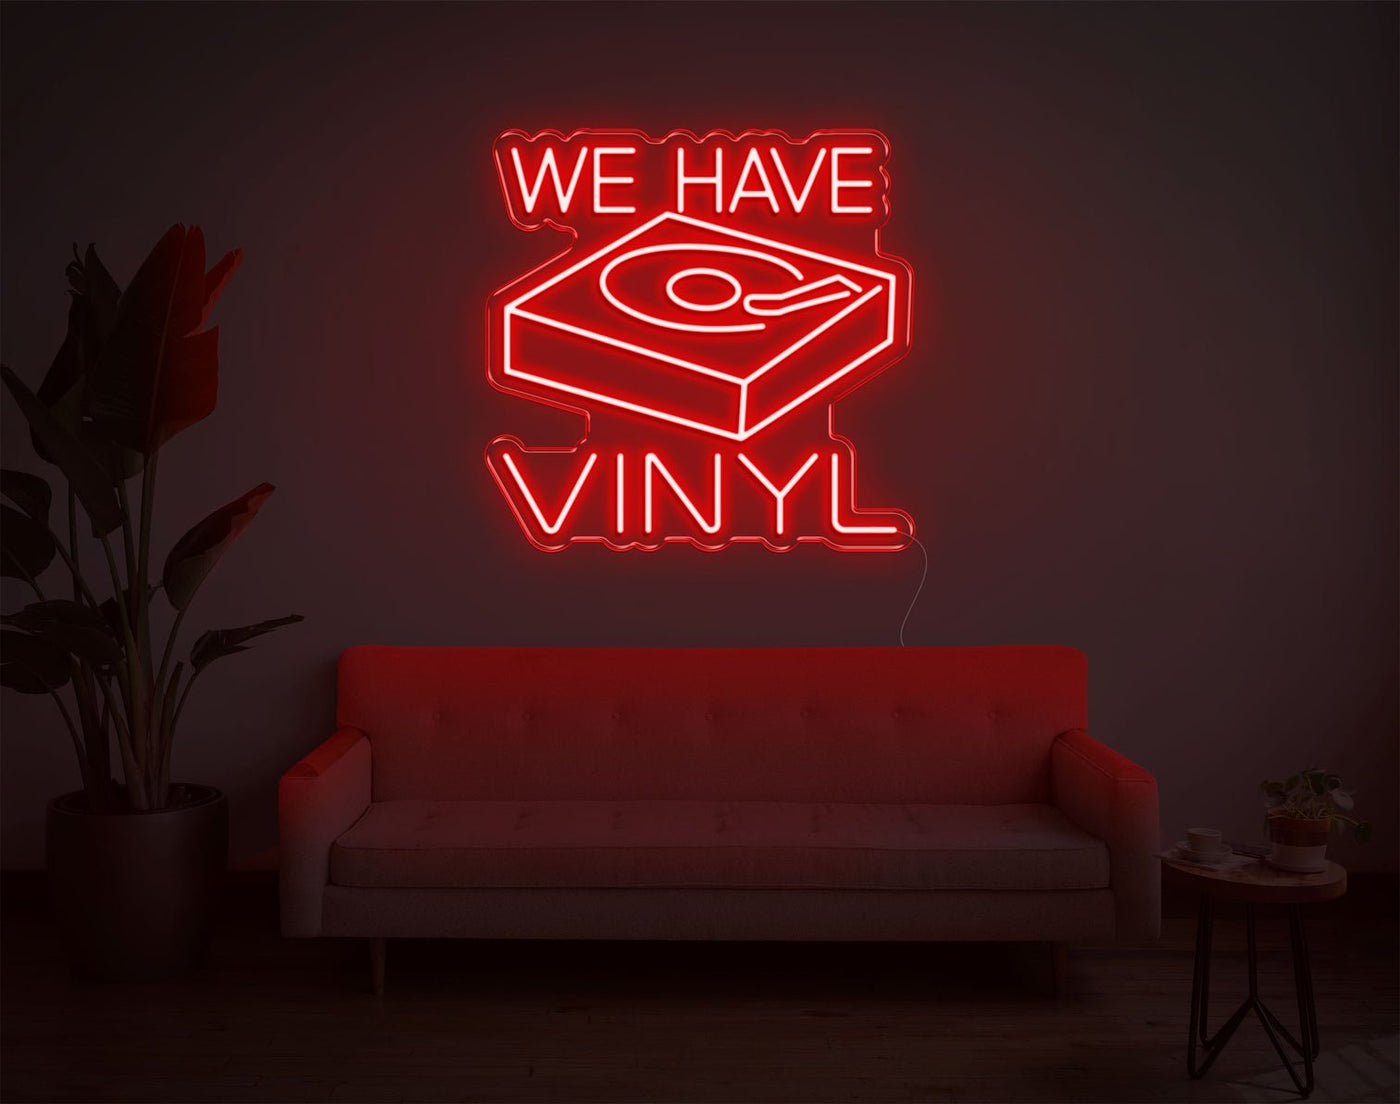 We Have Vinyl LED Neon Sign - 20inch x 20inchRed